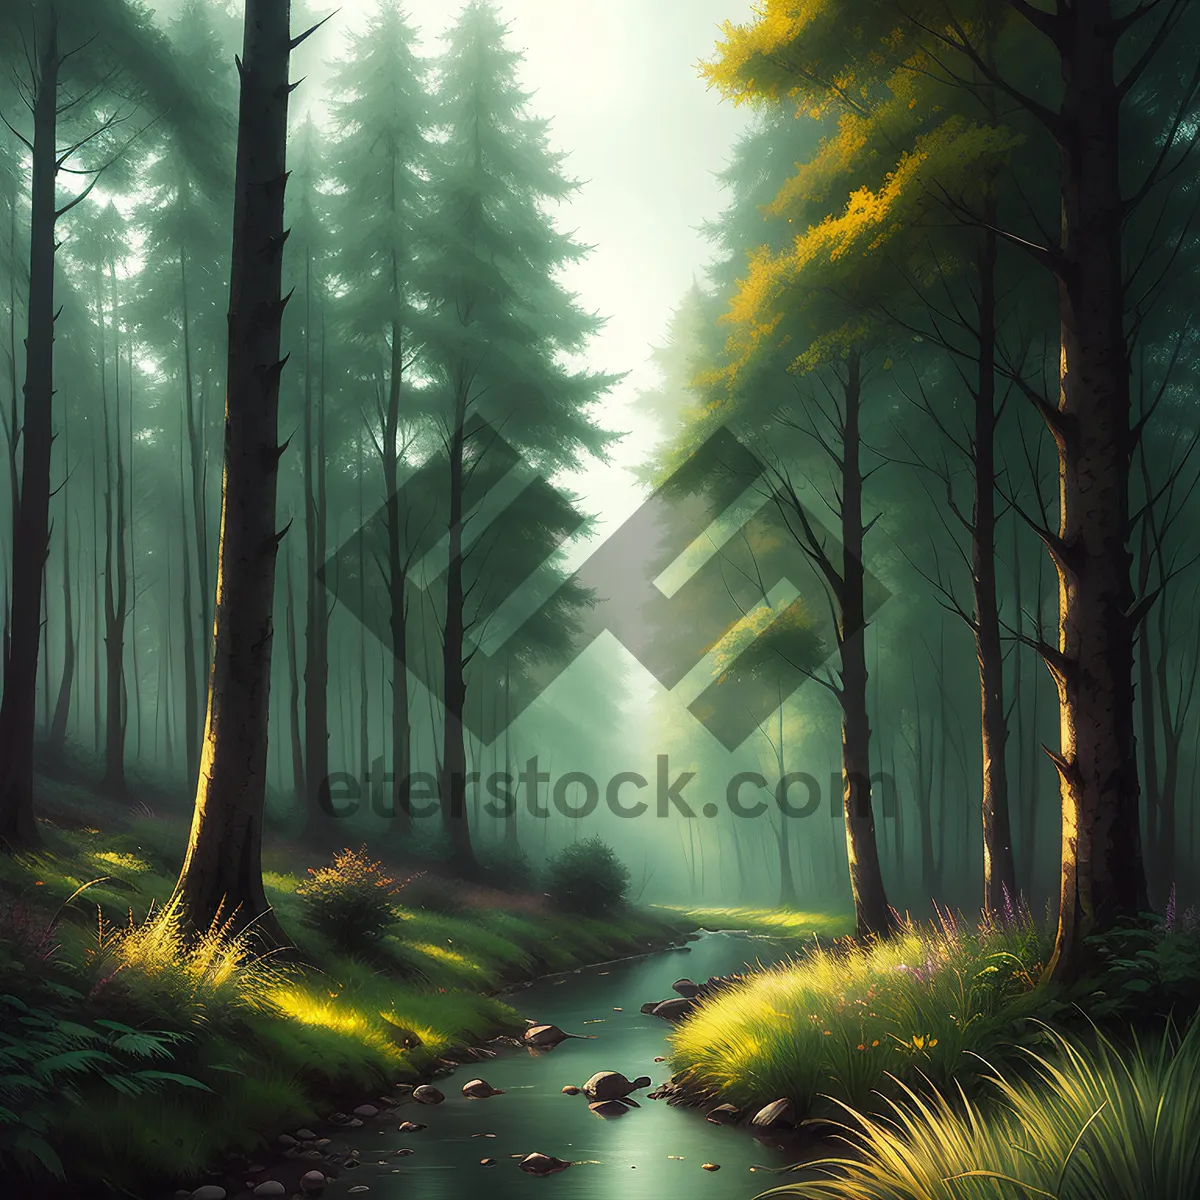 Picture of Majestic Celestial Landscape in a Glowing Forest